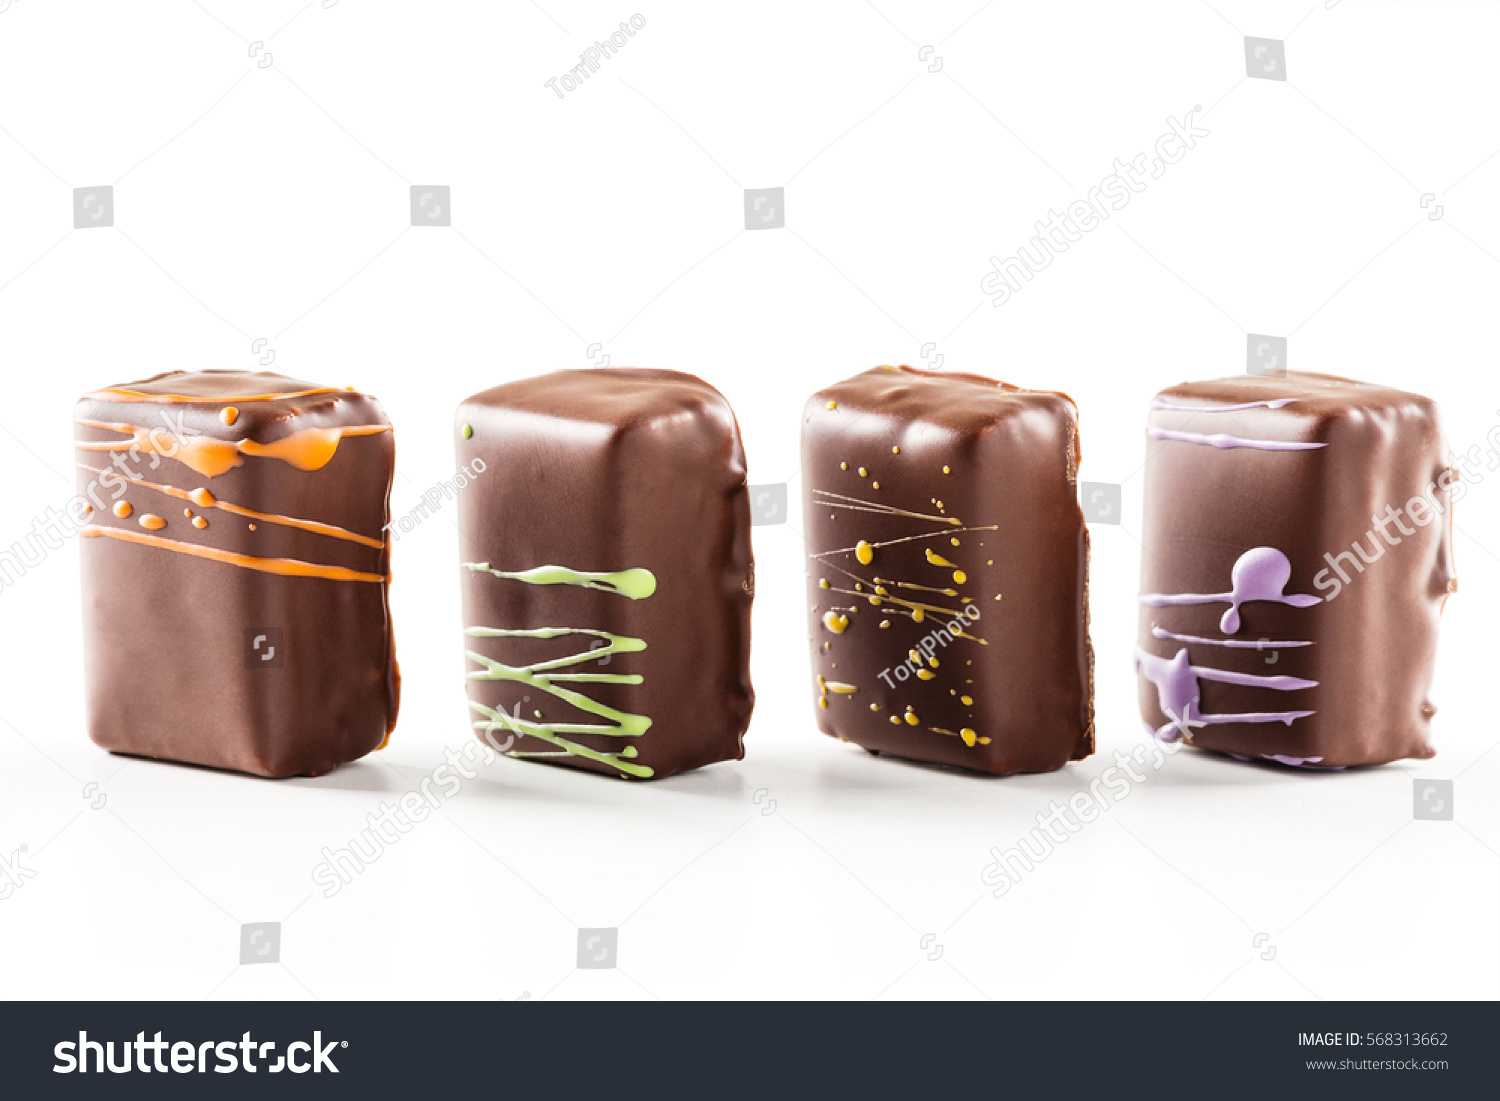 https://www.shutterstock.com/image-photo/fine-chocolate-candies-bars-isolated-on-568313662